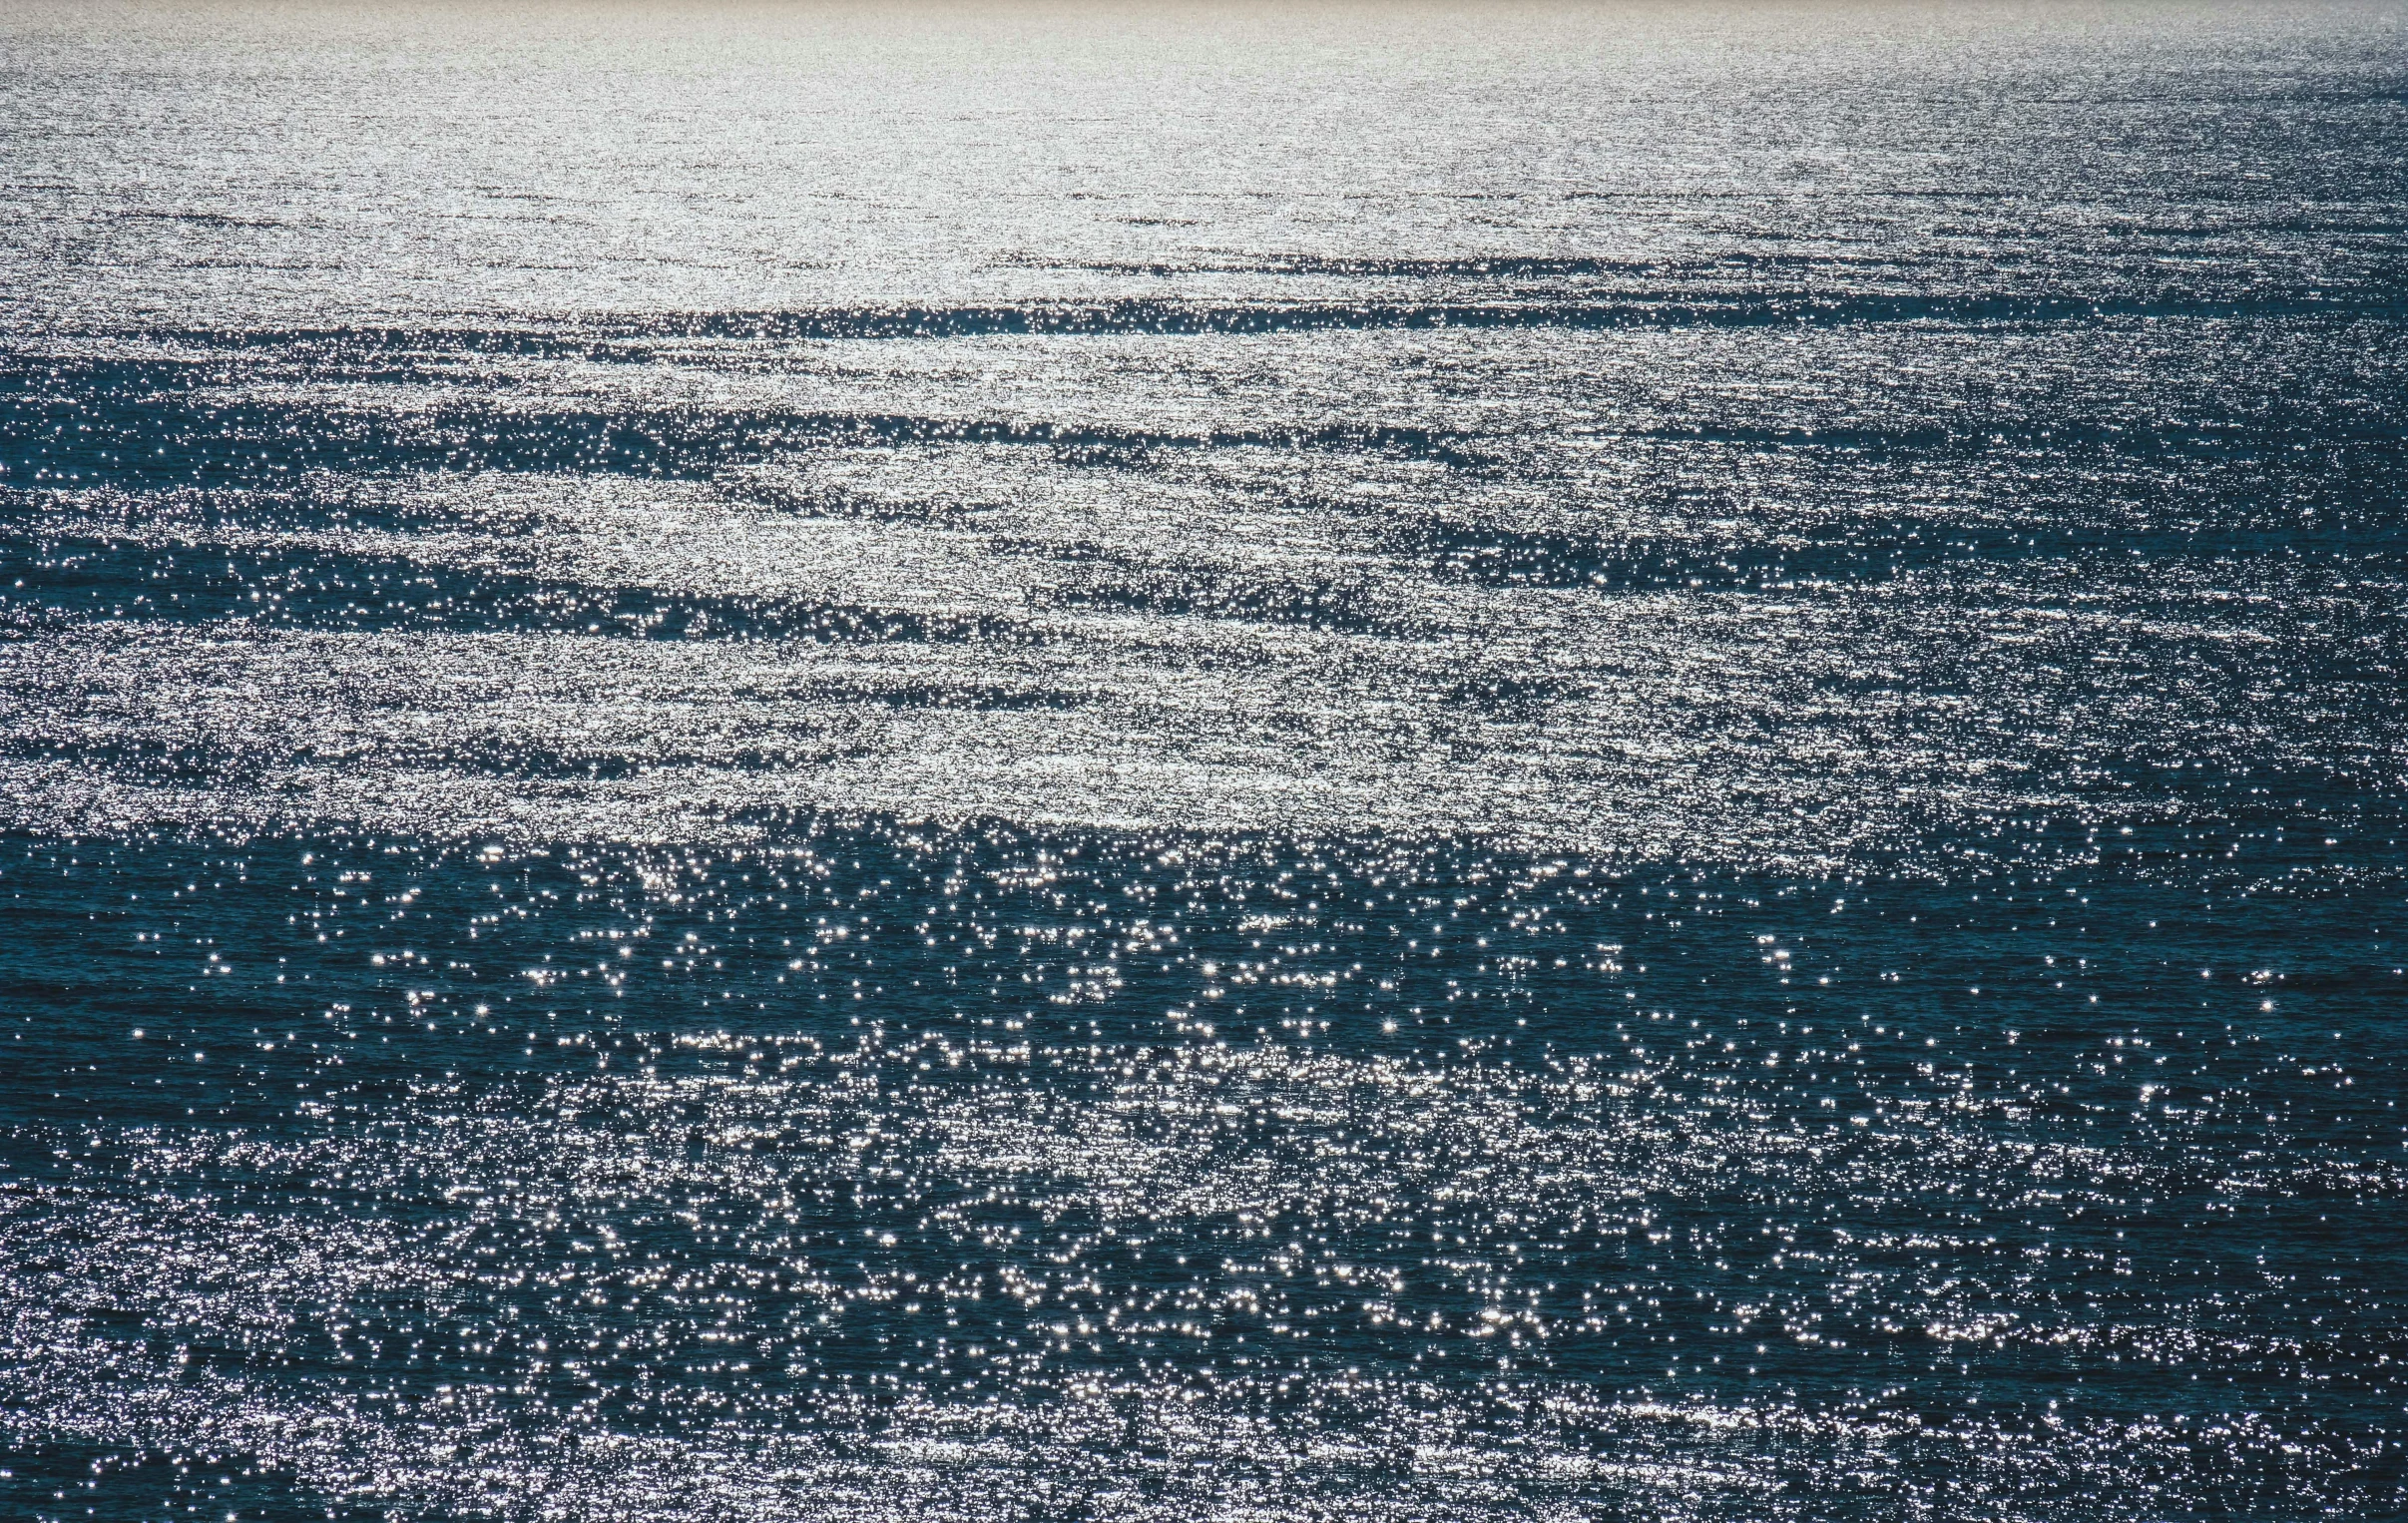 an aerial view of the ocean with a boat in the distance